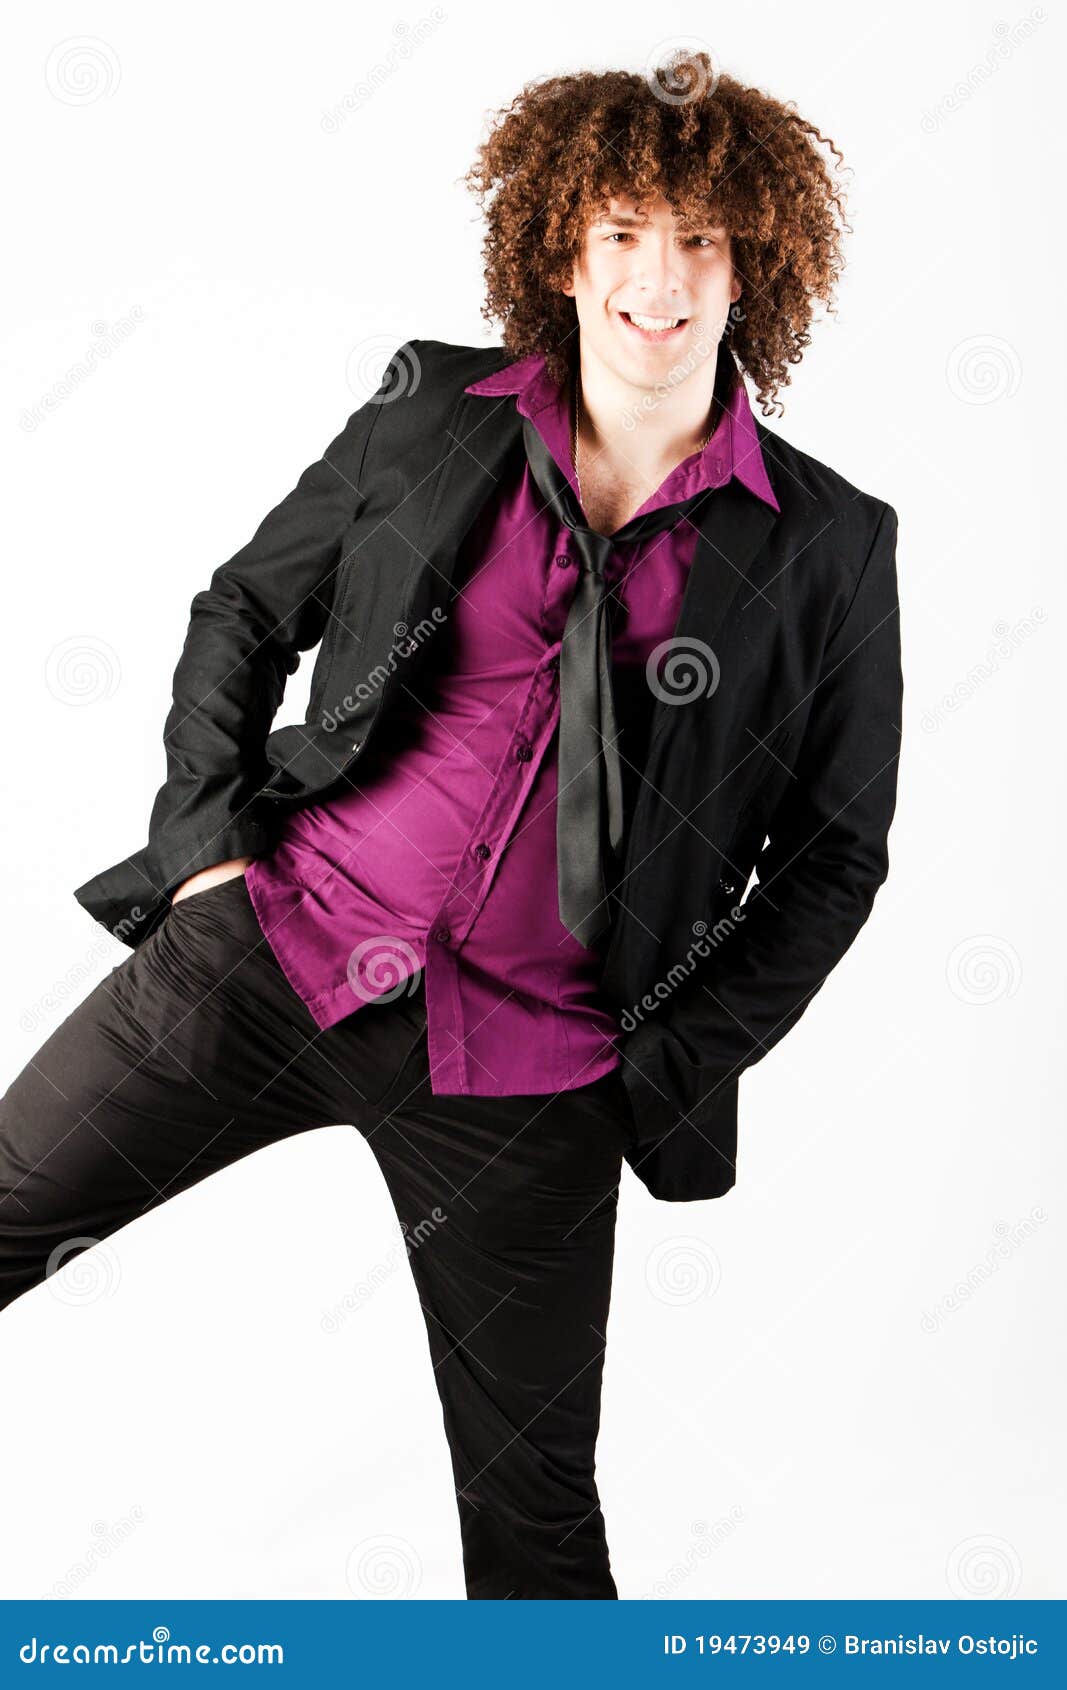 Happy Man With Curly Hair In Suit Stock Image Image Of